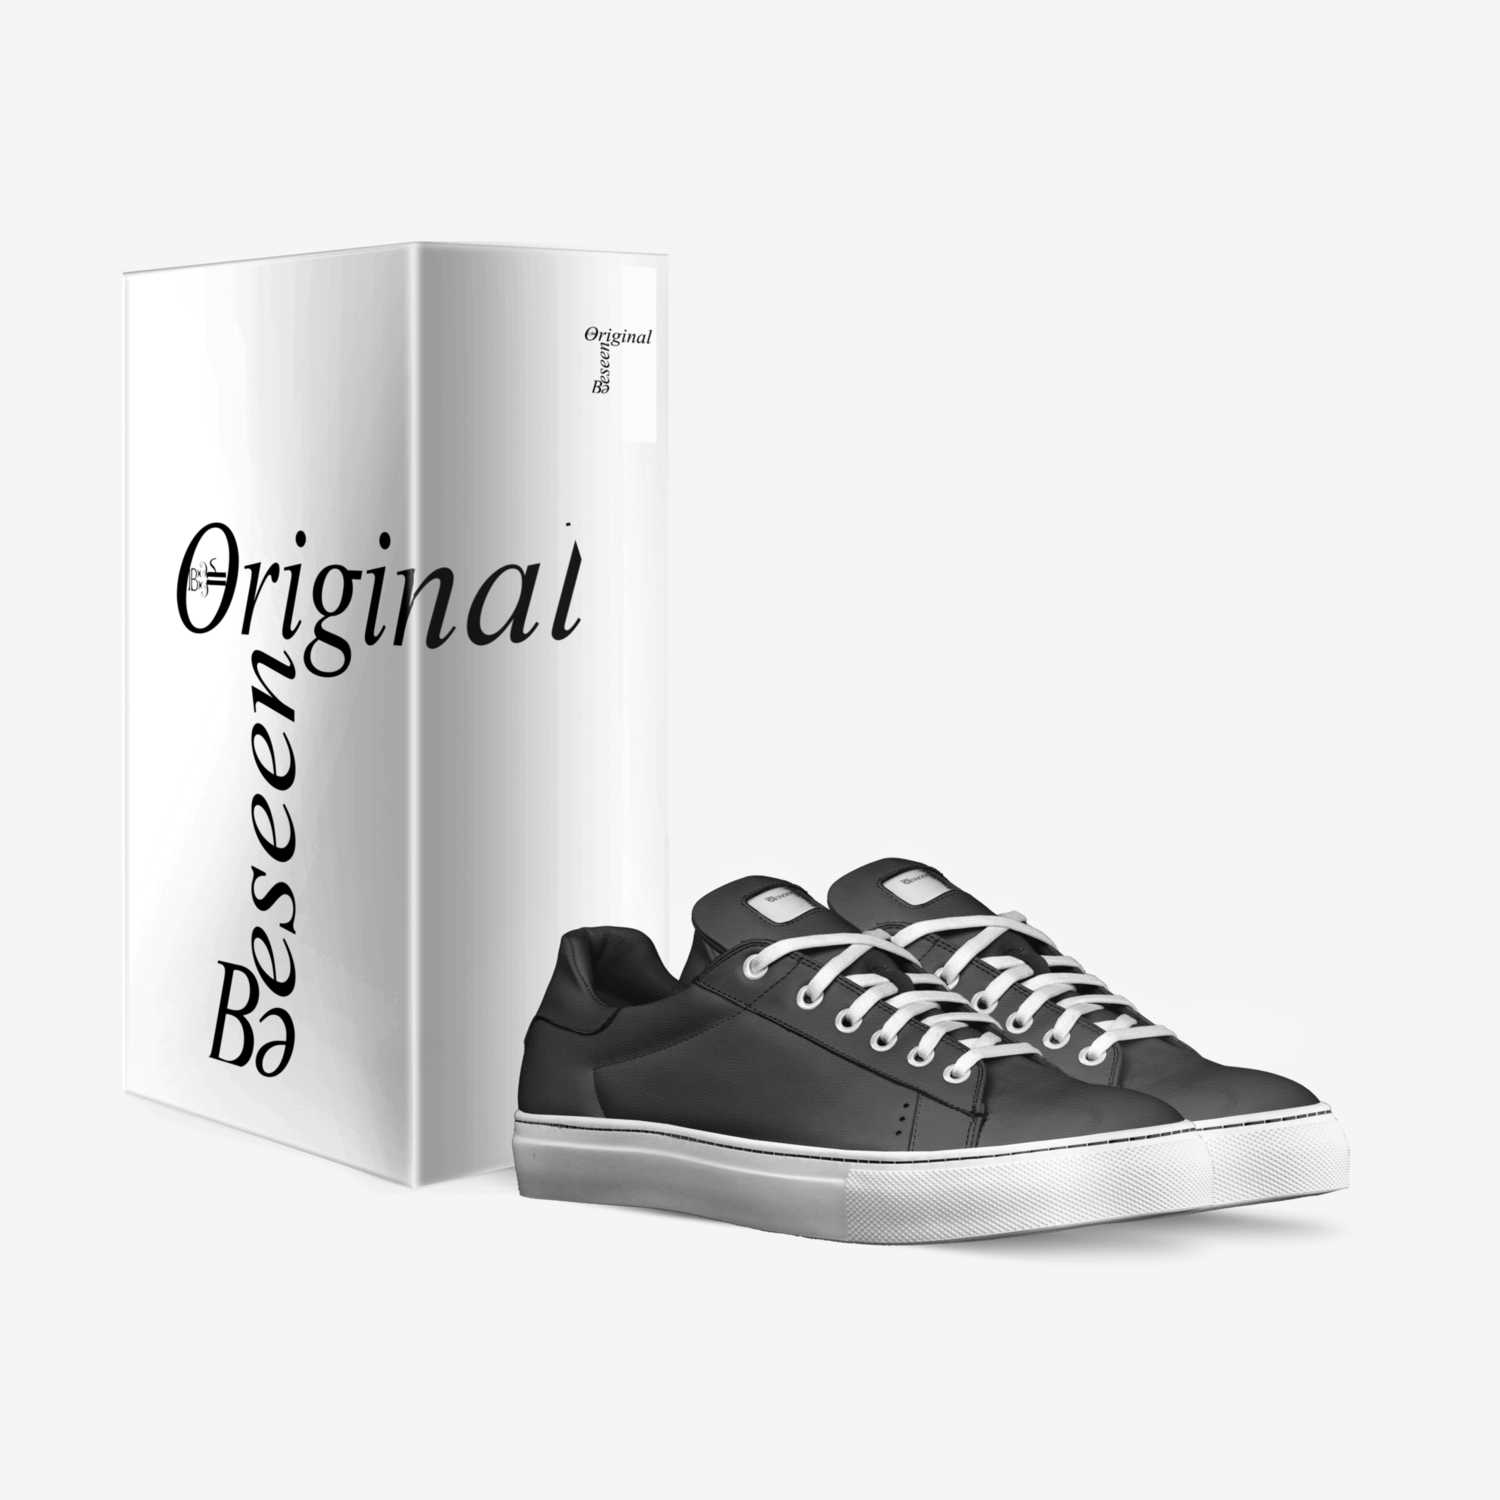 Org'z custom made in Italy shoes by Terran Nalls | Box view